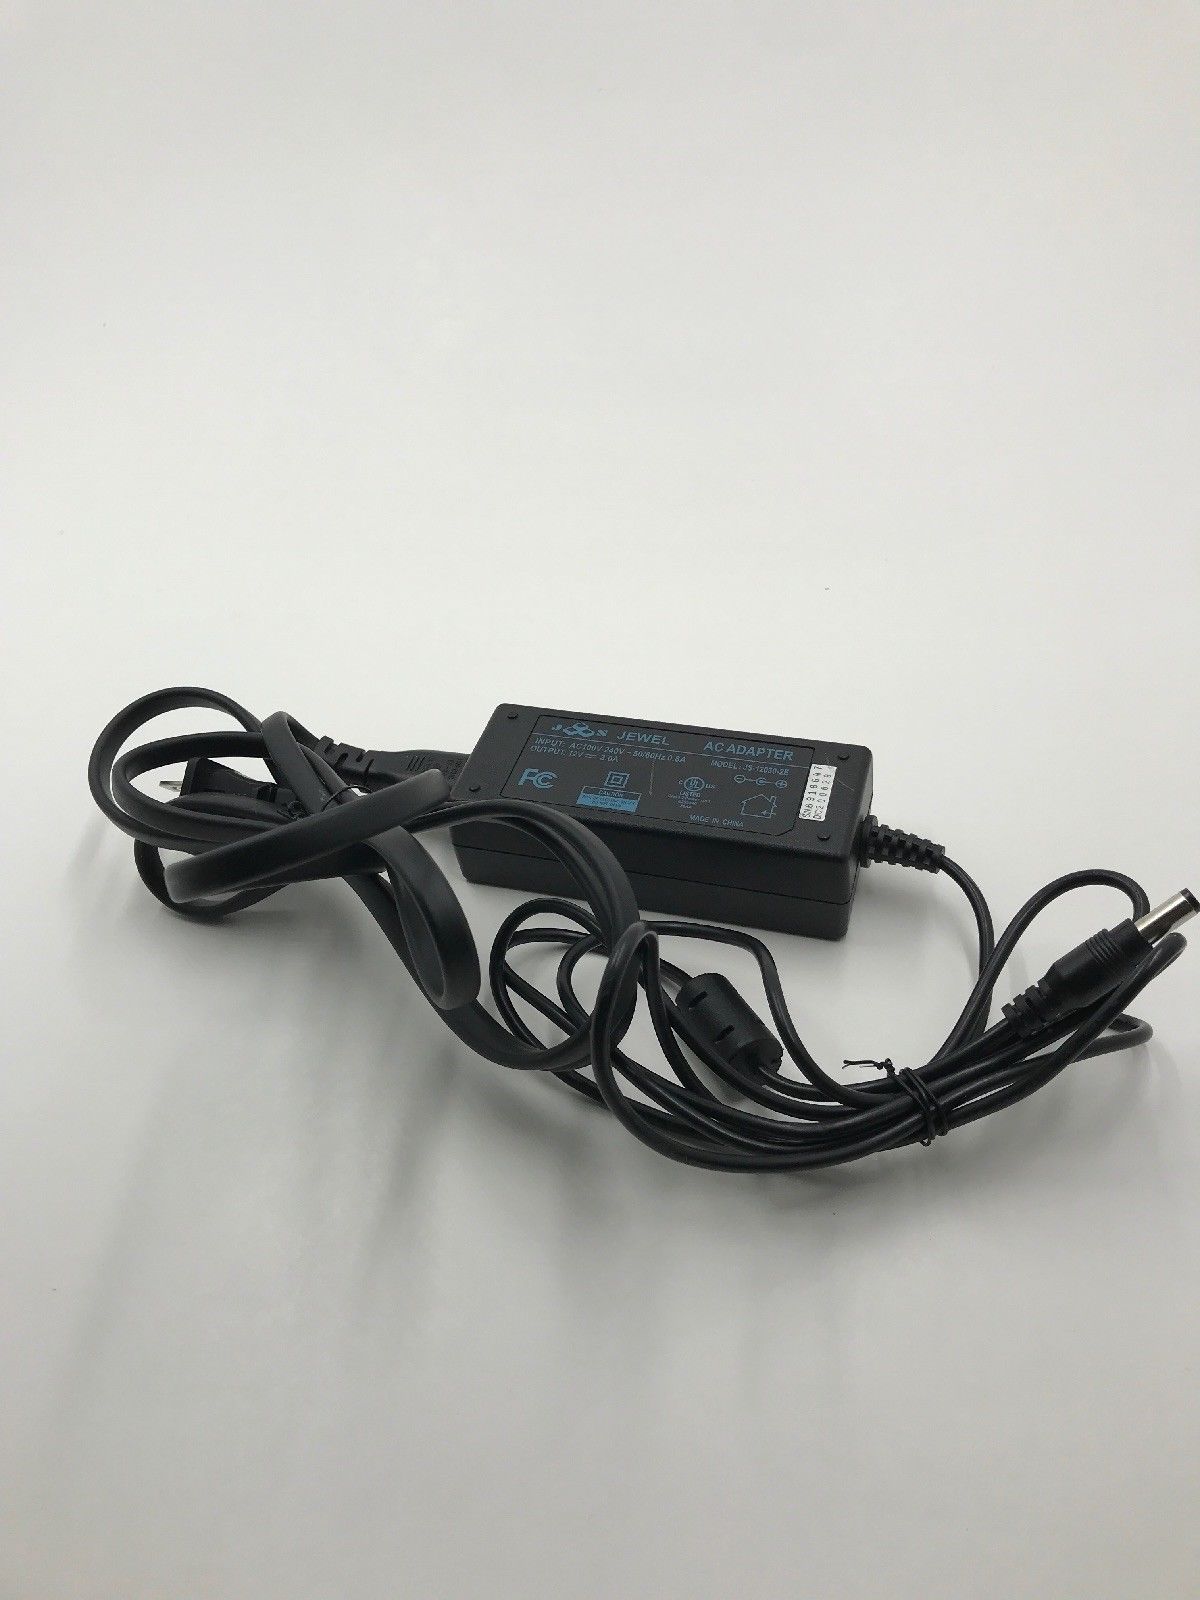 NEW Jewel JS-12030-2E 12V 3A LCD Power Supply Cord Charger AC DC Adapter - Click Image to Close